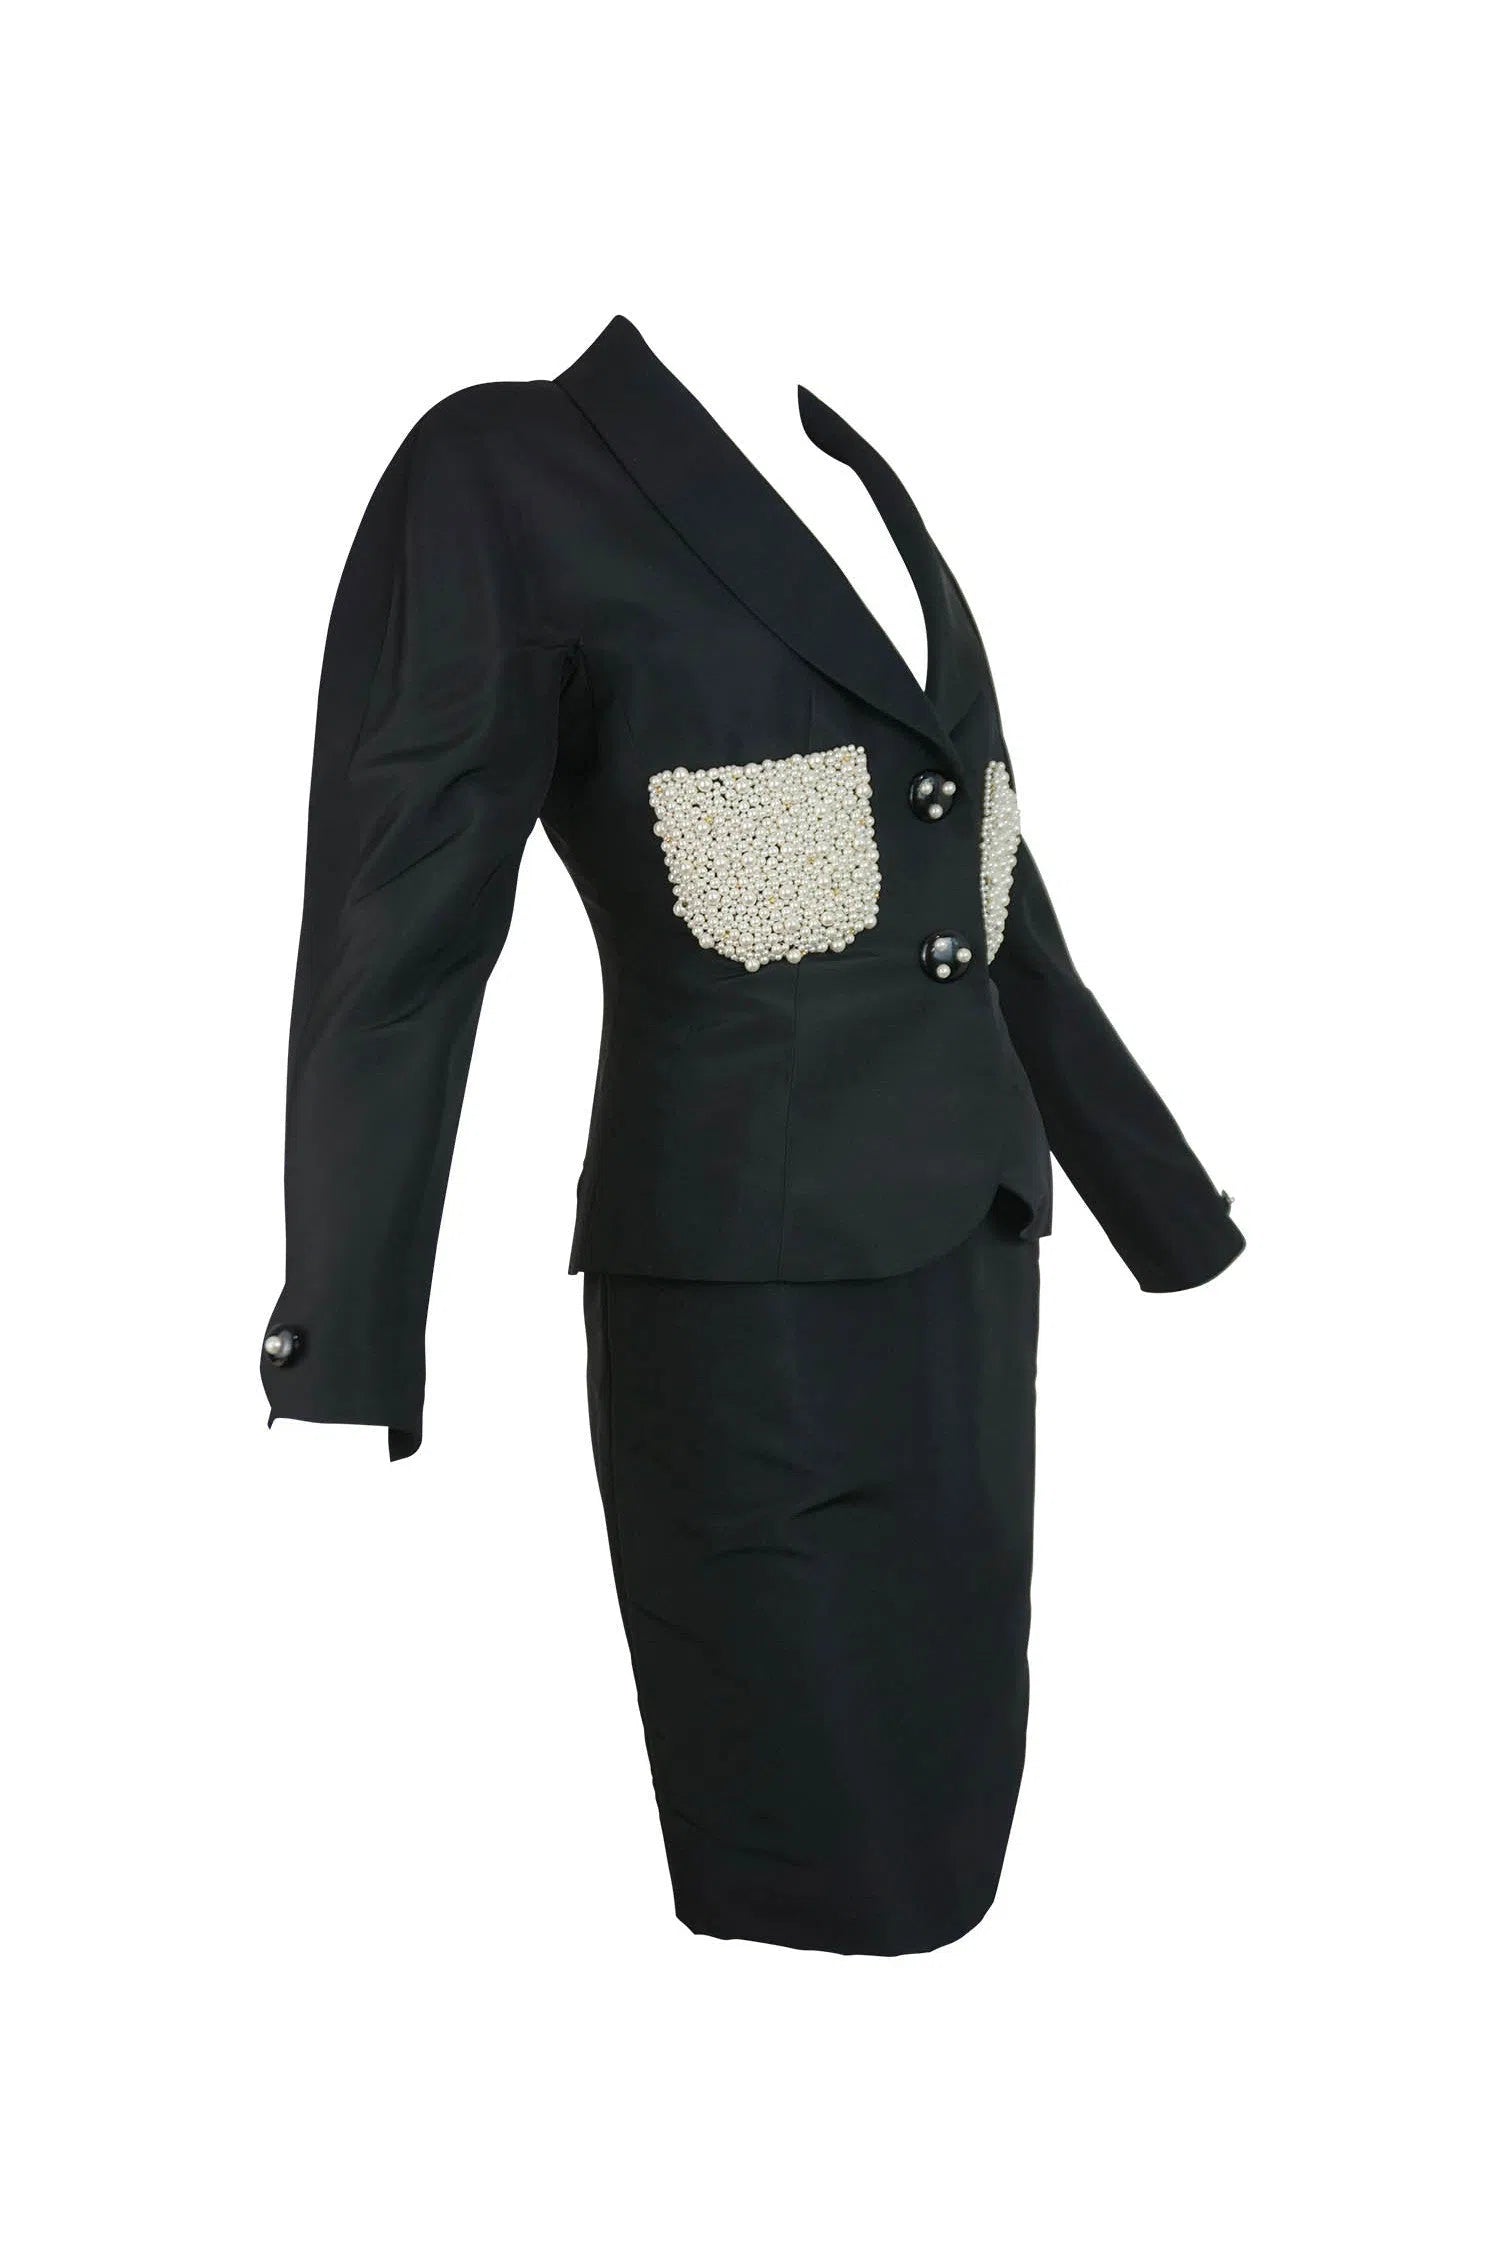 Chanel Pearl Pocket Jacket Suit 1980s